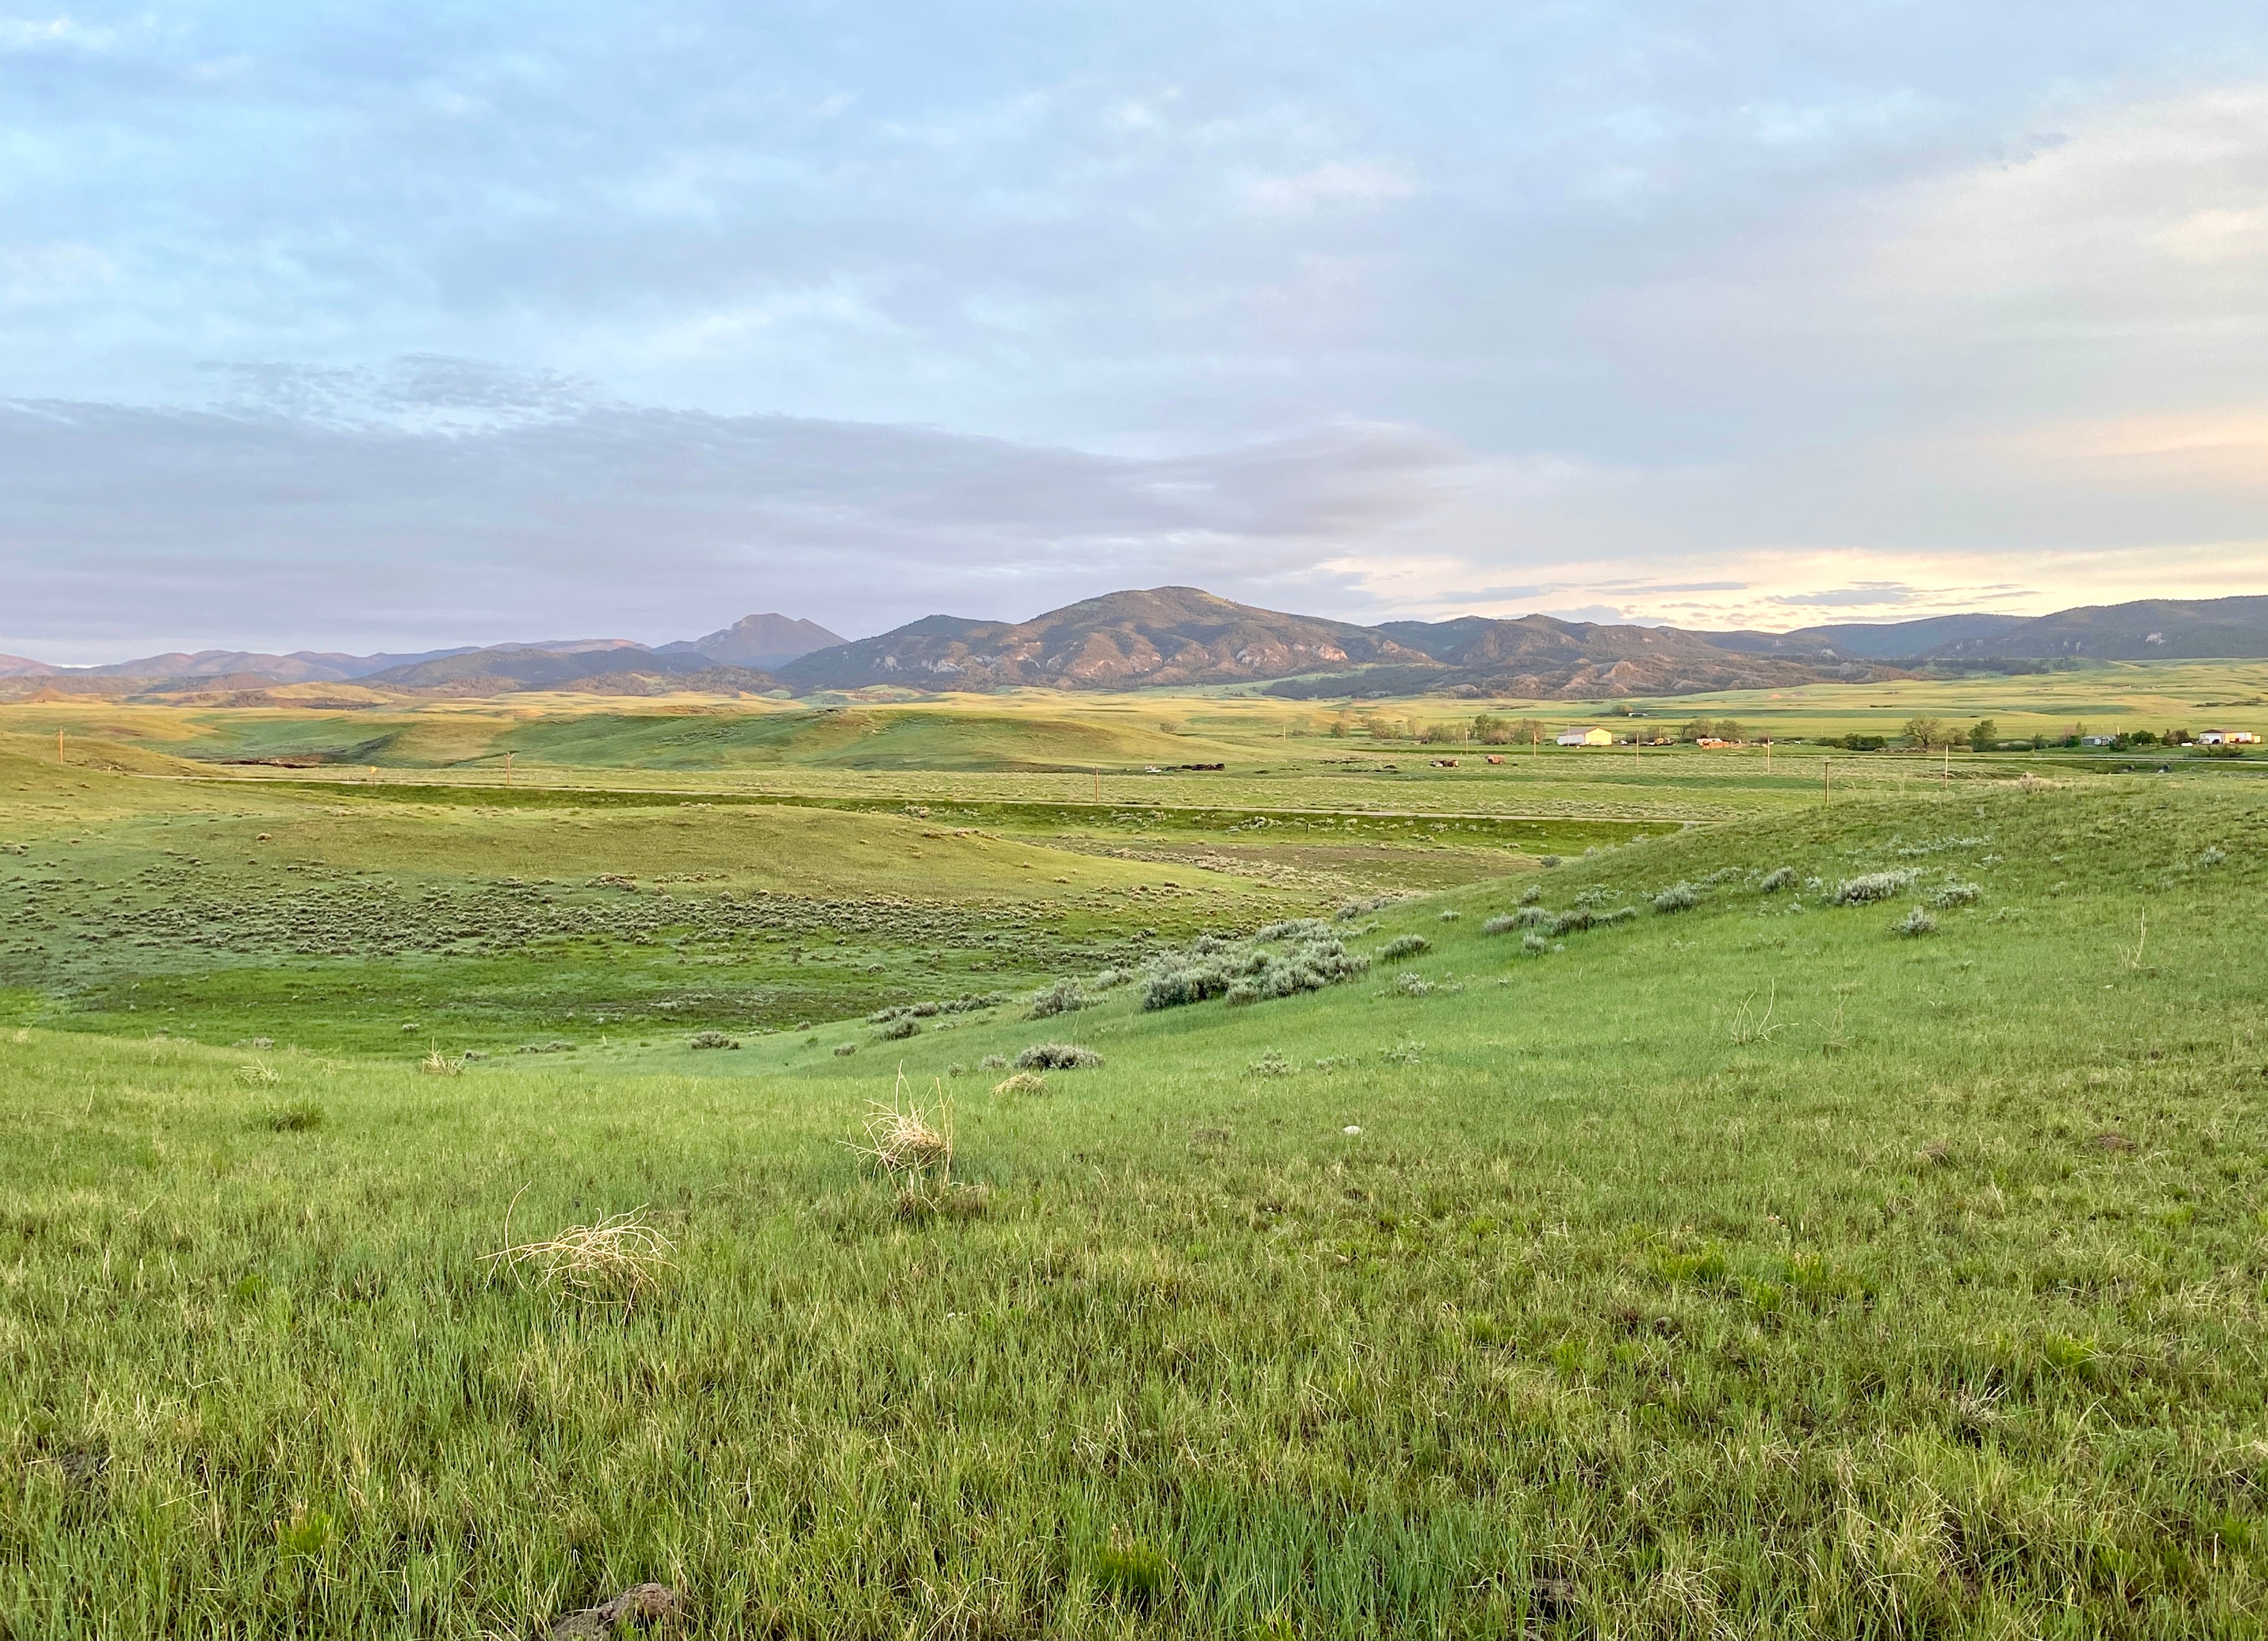 image shows an expansive view of lush grassy hills with sagebrush shrubs. Far in the distance are rolling mountains that are reflecting purplish pink in the morning light